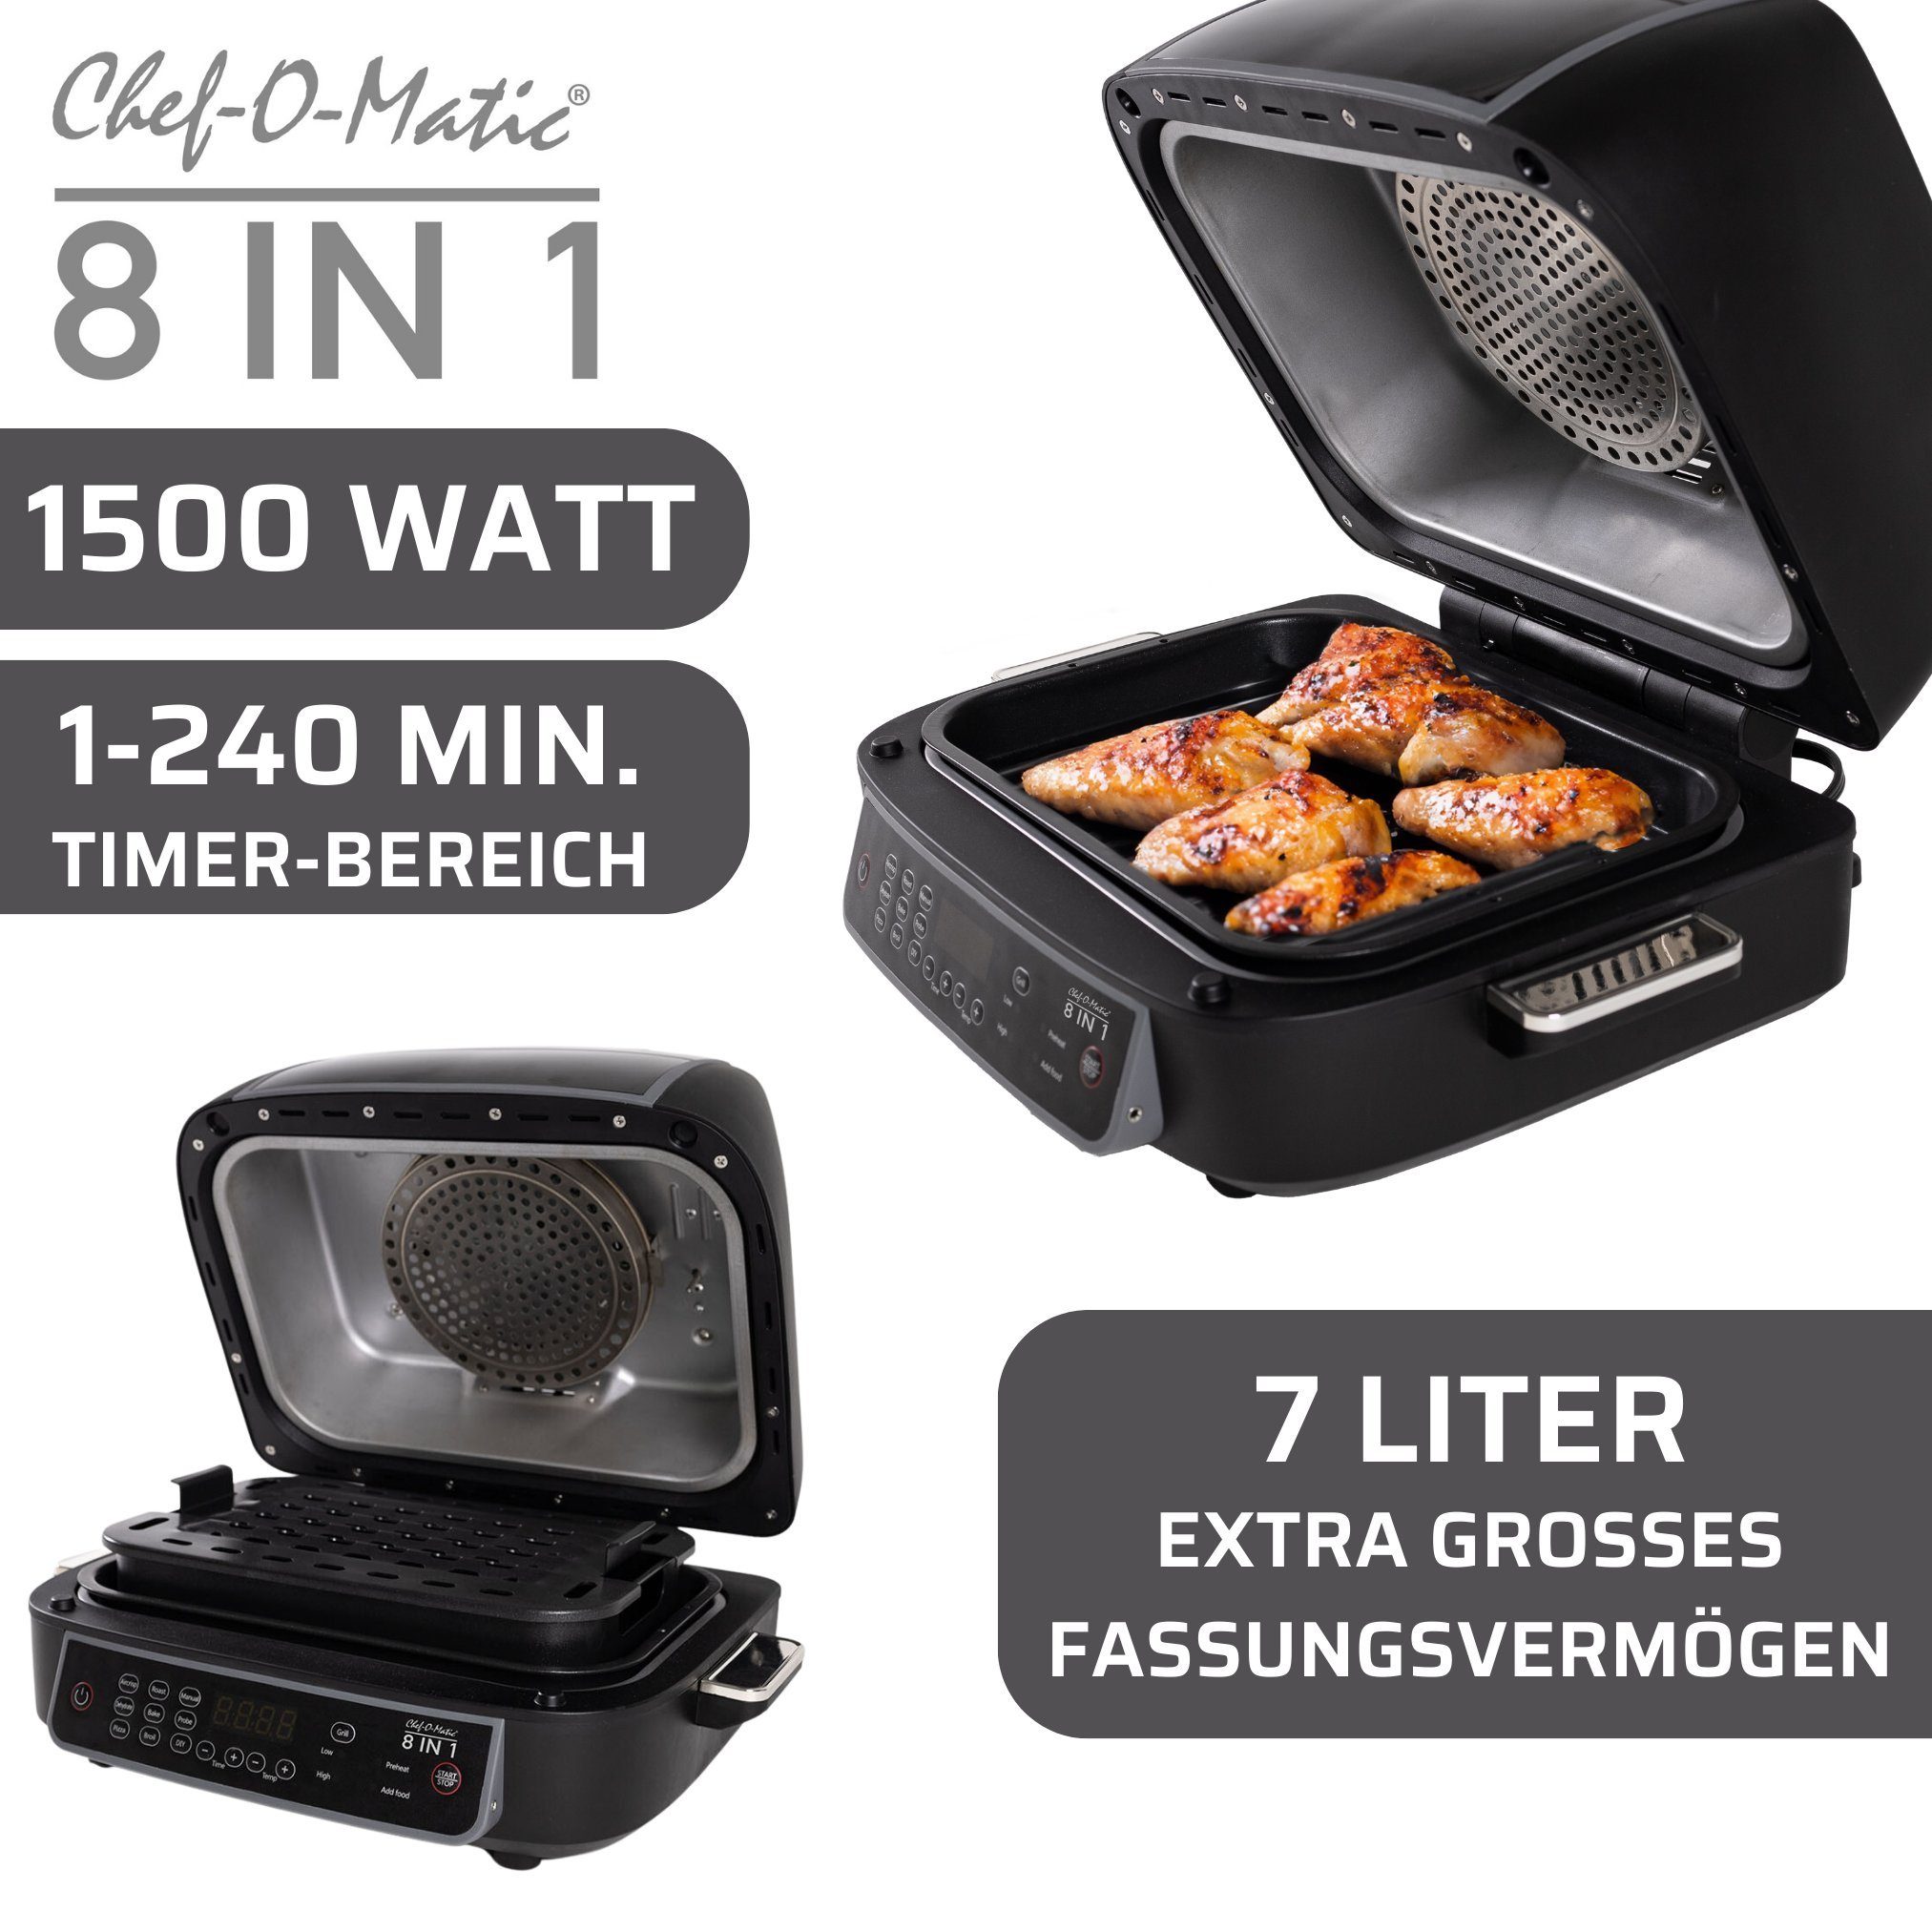 Best Direct® Heißluftfritteuse in 1500,00 Grill 8 Chef-O-Matic® Multikocher, 1 Backofen, Indoor Fritteuse, Mini Air Grill, & Heißluftofen, W, Ofen